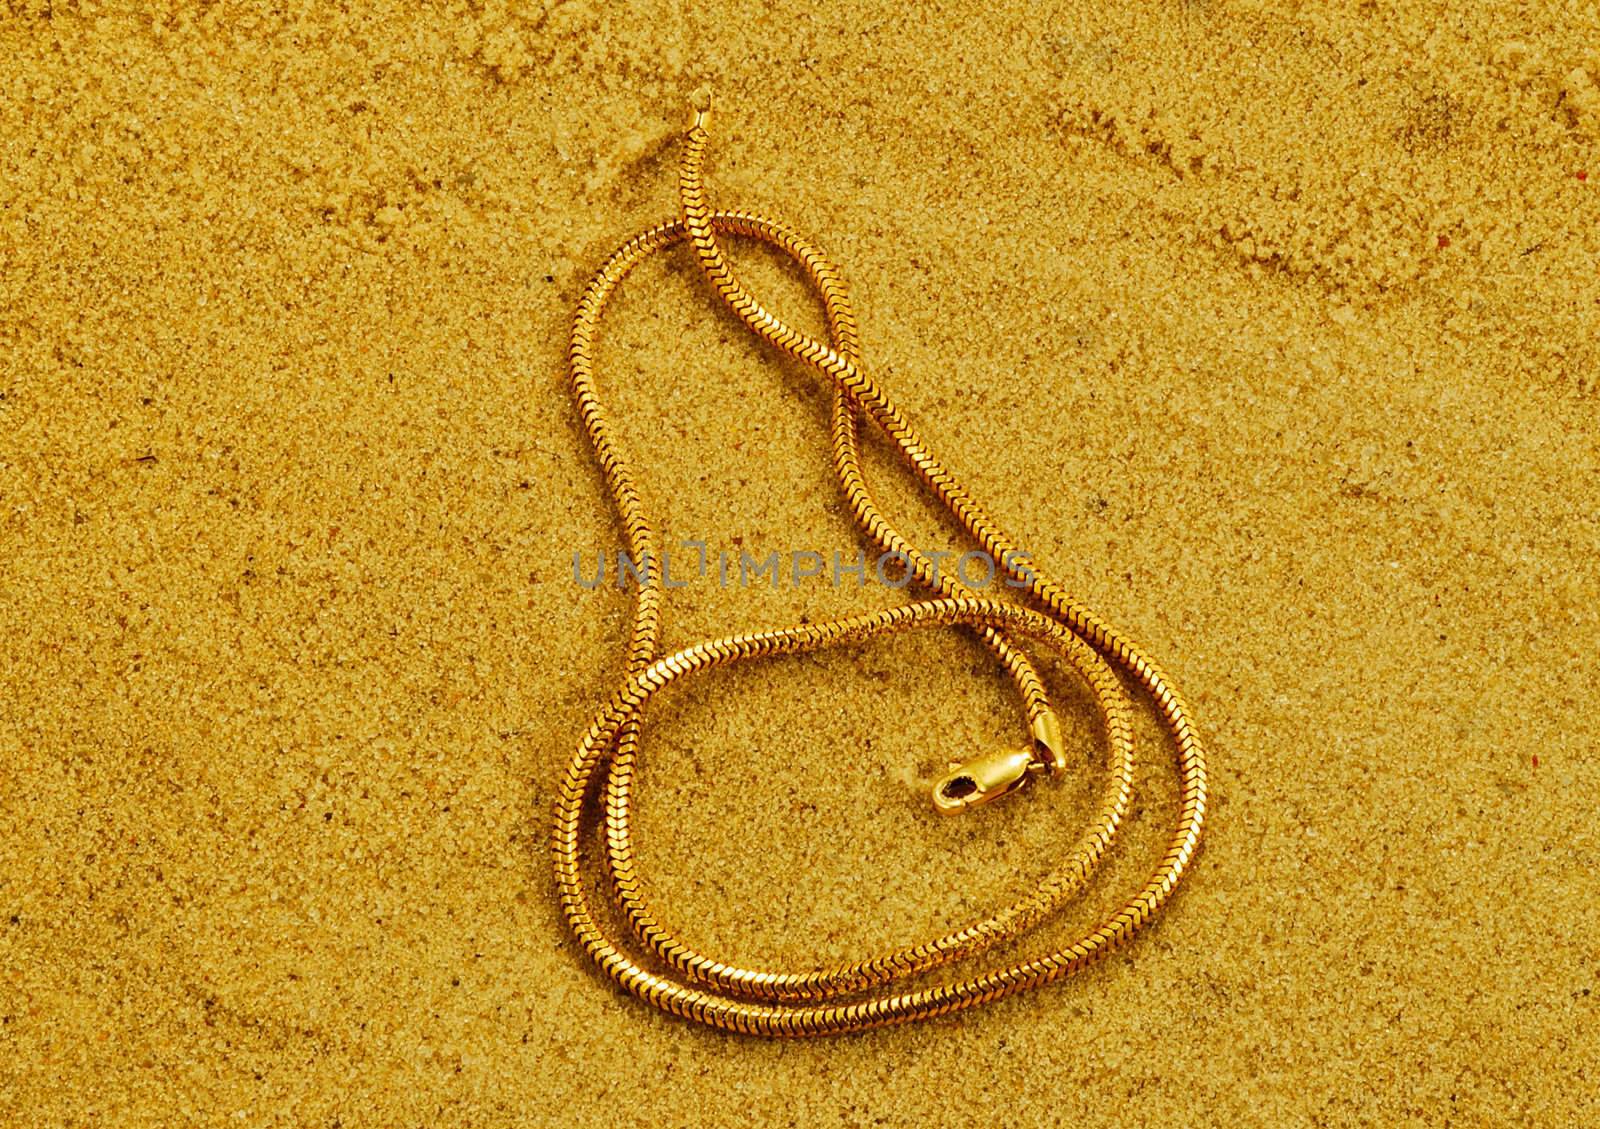 gold chainlets are on yellow loose sand